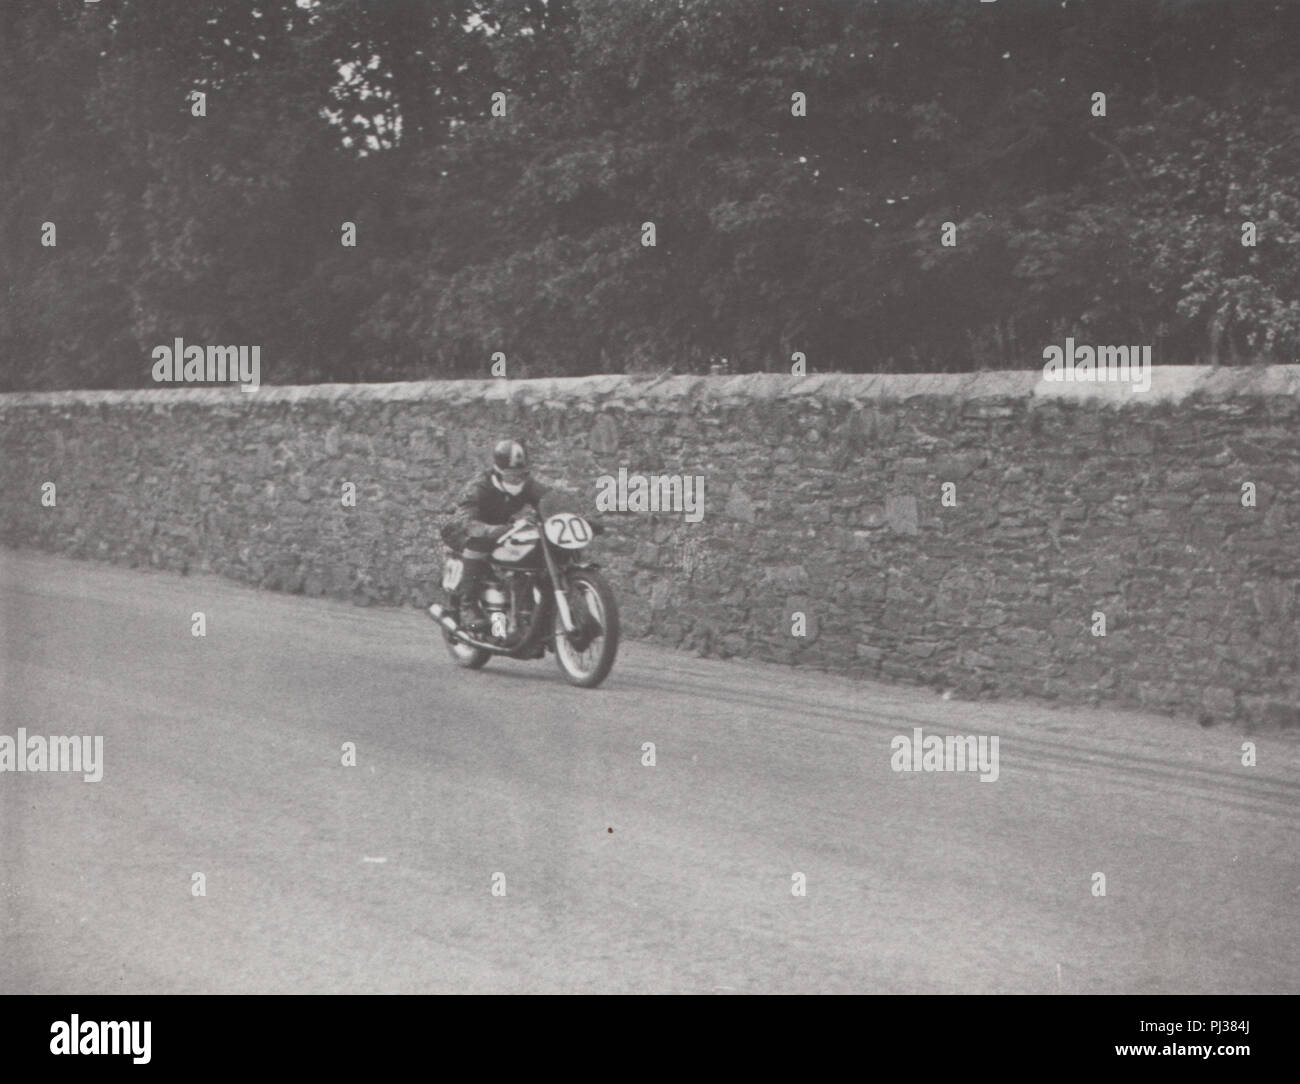 Vintage 1950 Photograph of a Motorcycle Race at Cadwell Park, Lincolnshire. Motorcycle Rider L.R.Archer. 499 Norton Stock Photo